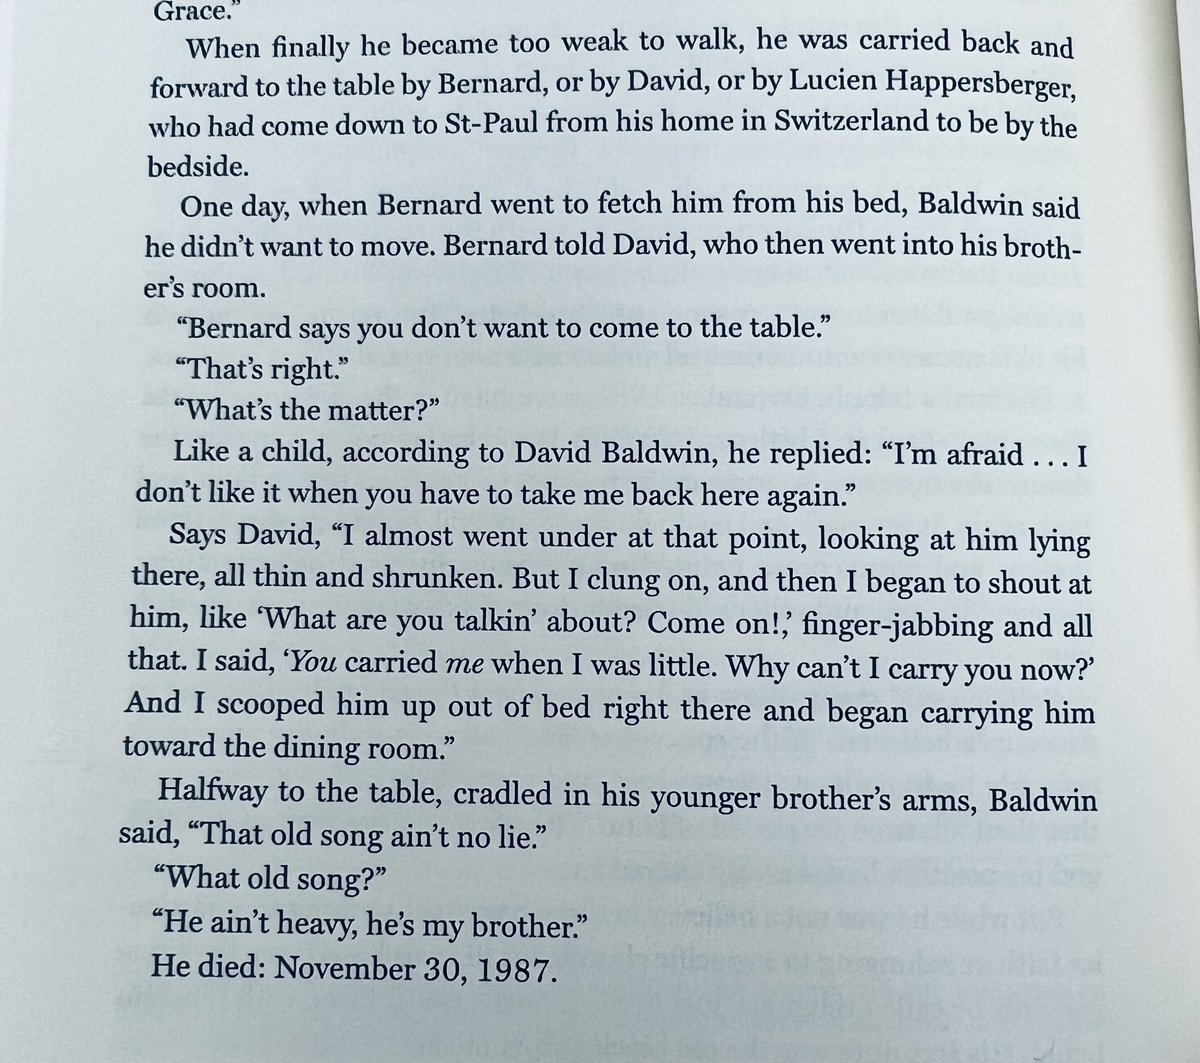 James Baldwin’s final days. From James Campbell’s Talking at the Gates.